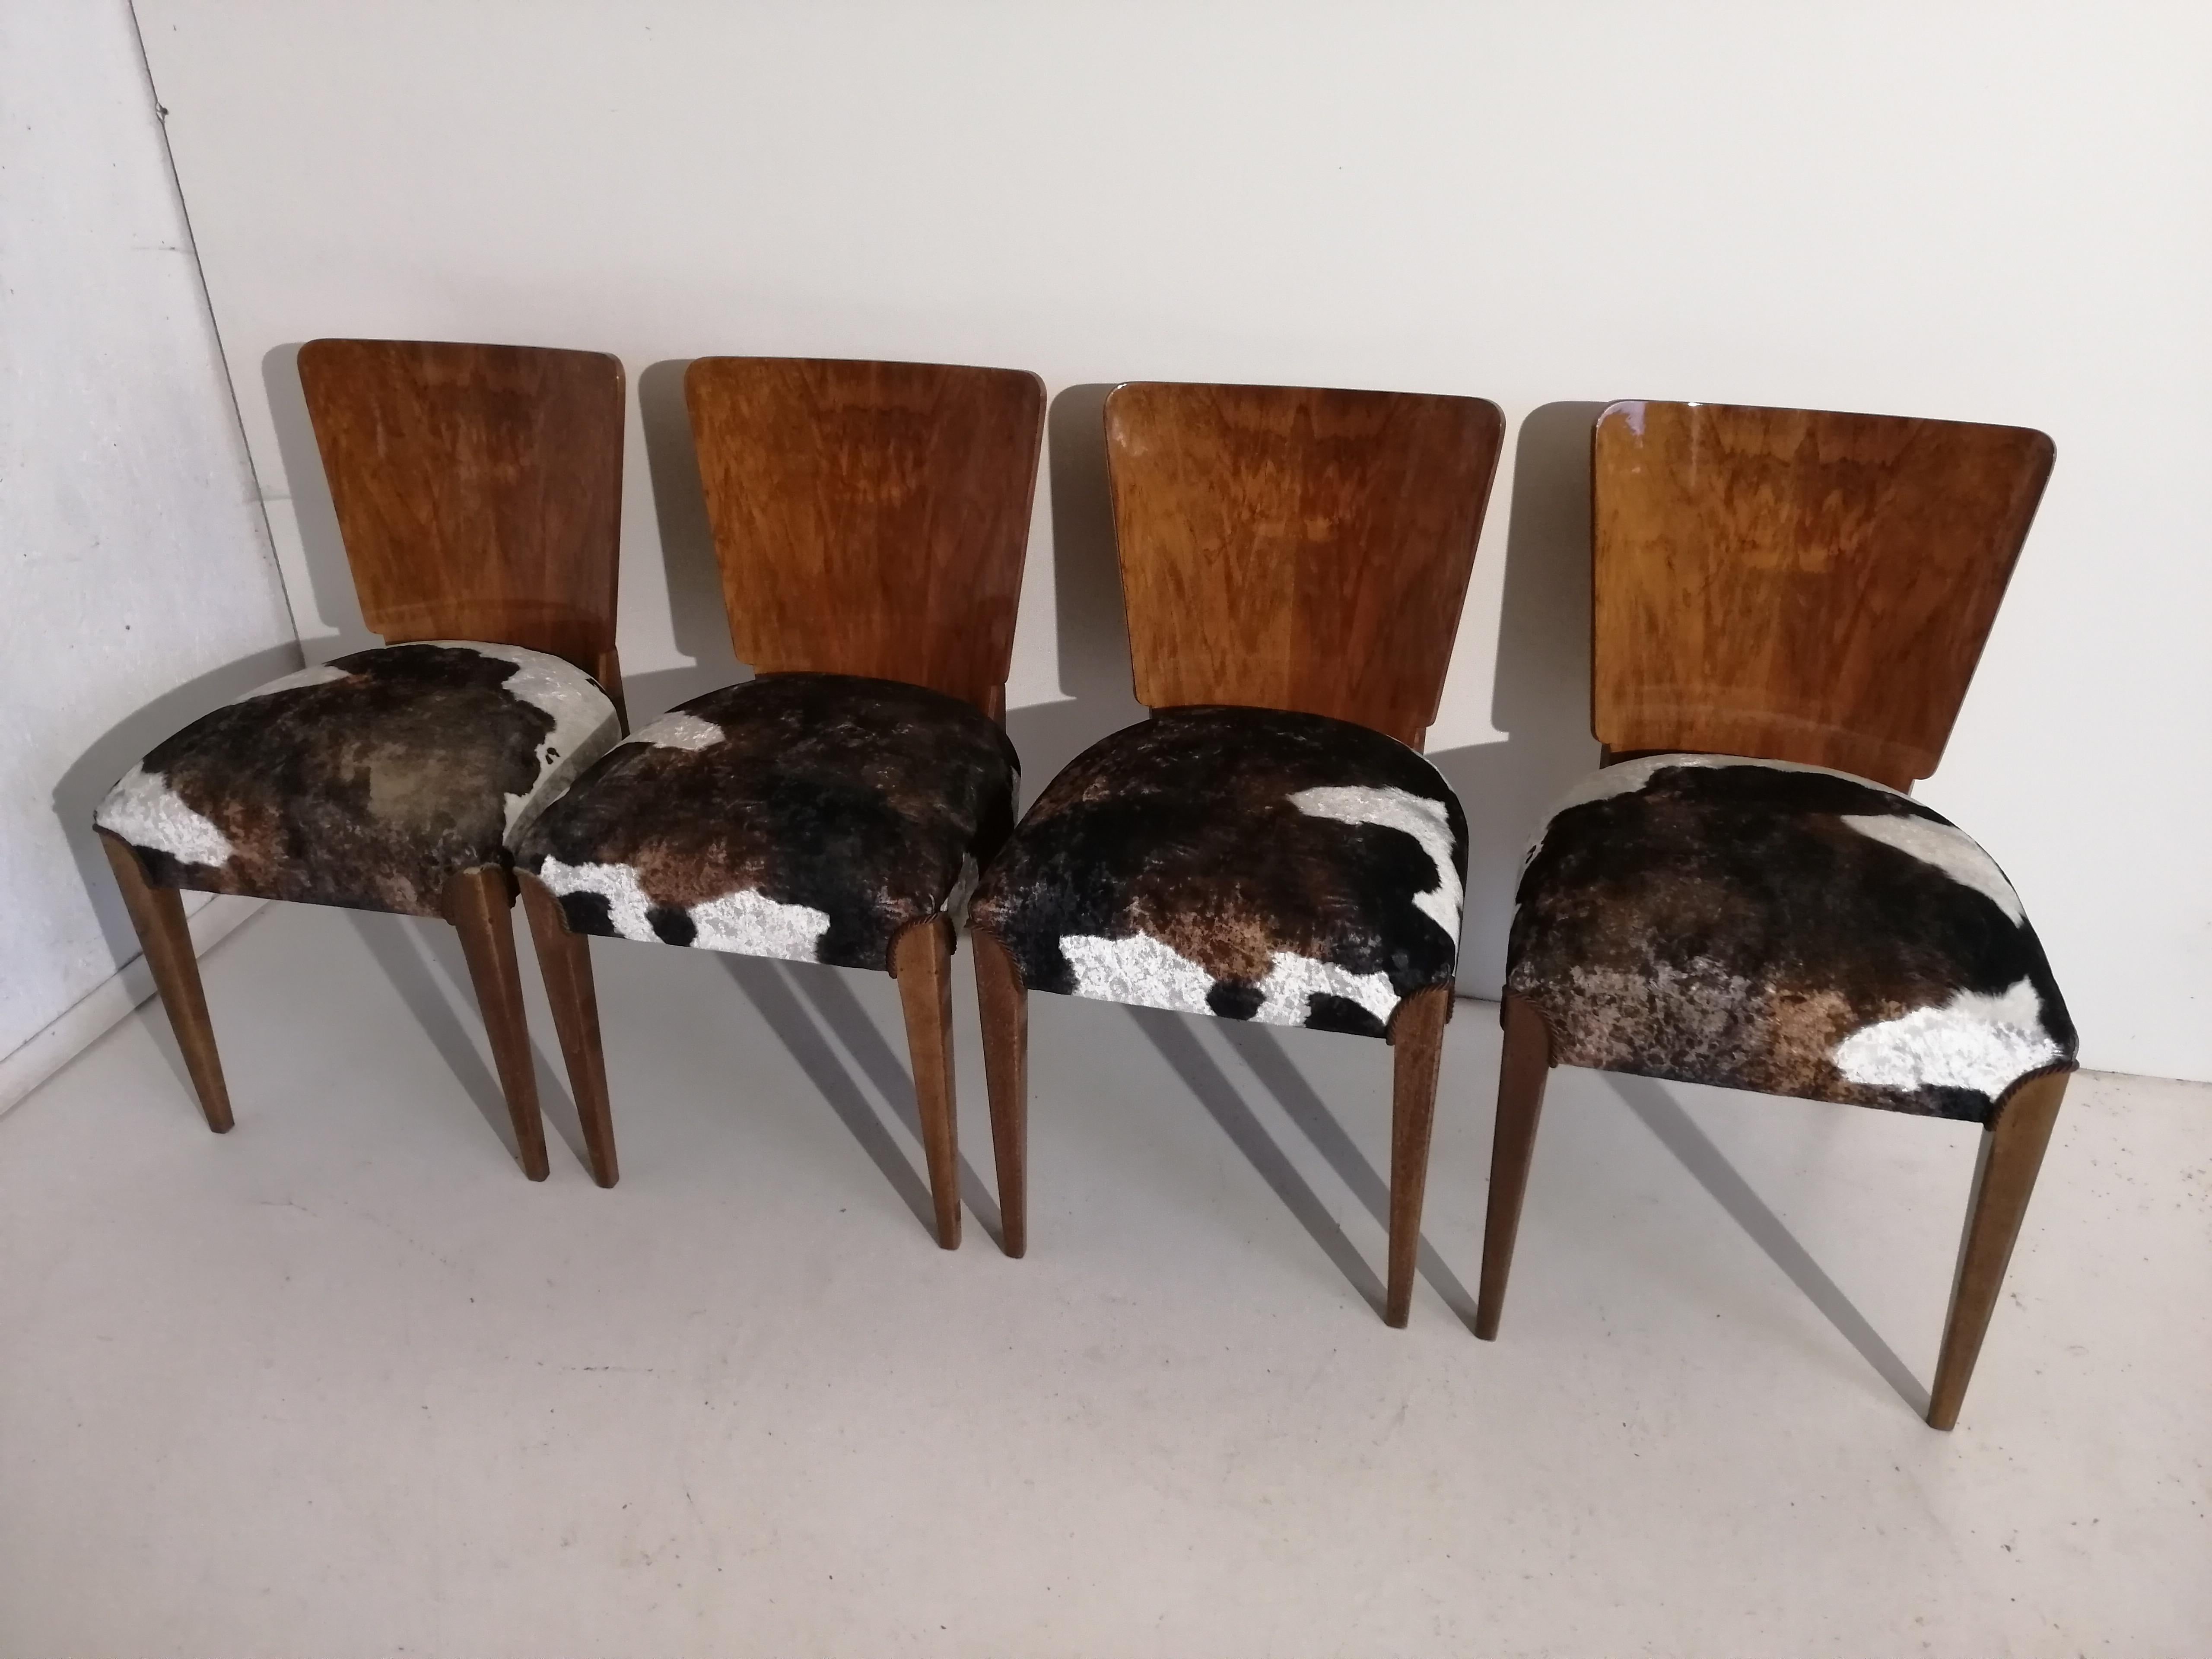 Art Deco four chairs by J. Halabala from 1940 we present the chairs by J. Halabala from 1940s (a Czech designer ranked among the most outstanding creators of the modern period. The peak of his career fell on the 1930s and 1940s when he worked for a